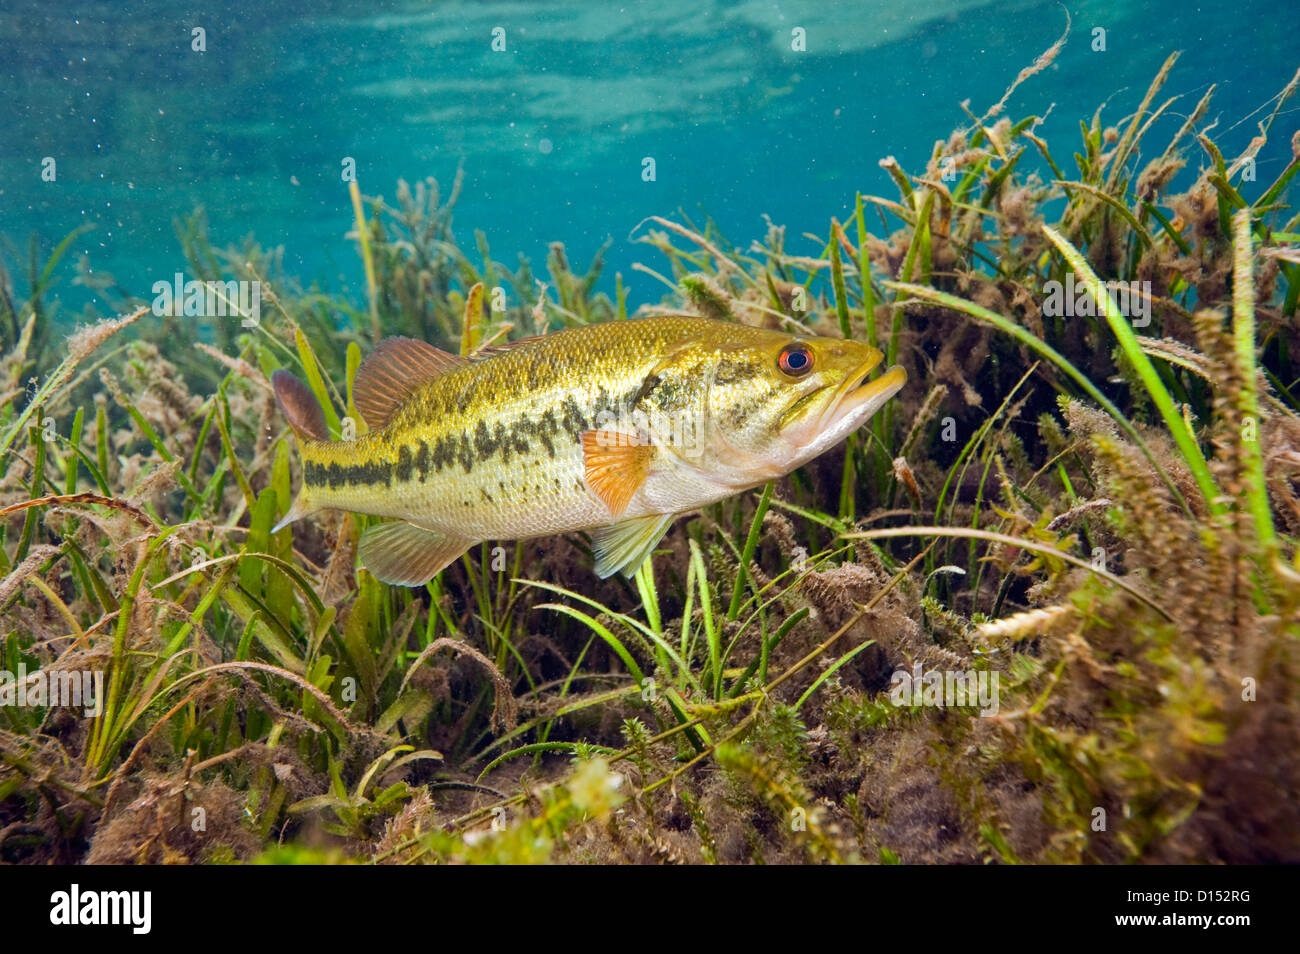 A male Large mouth bass, Micropterus salmoides, protects his nest in the Rainbow River in Northwest Florida, United States. Stock Photo